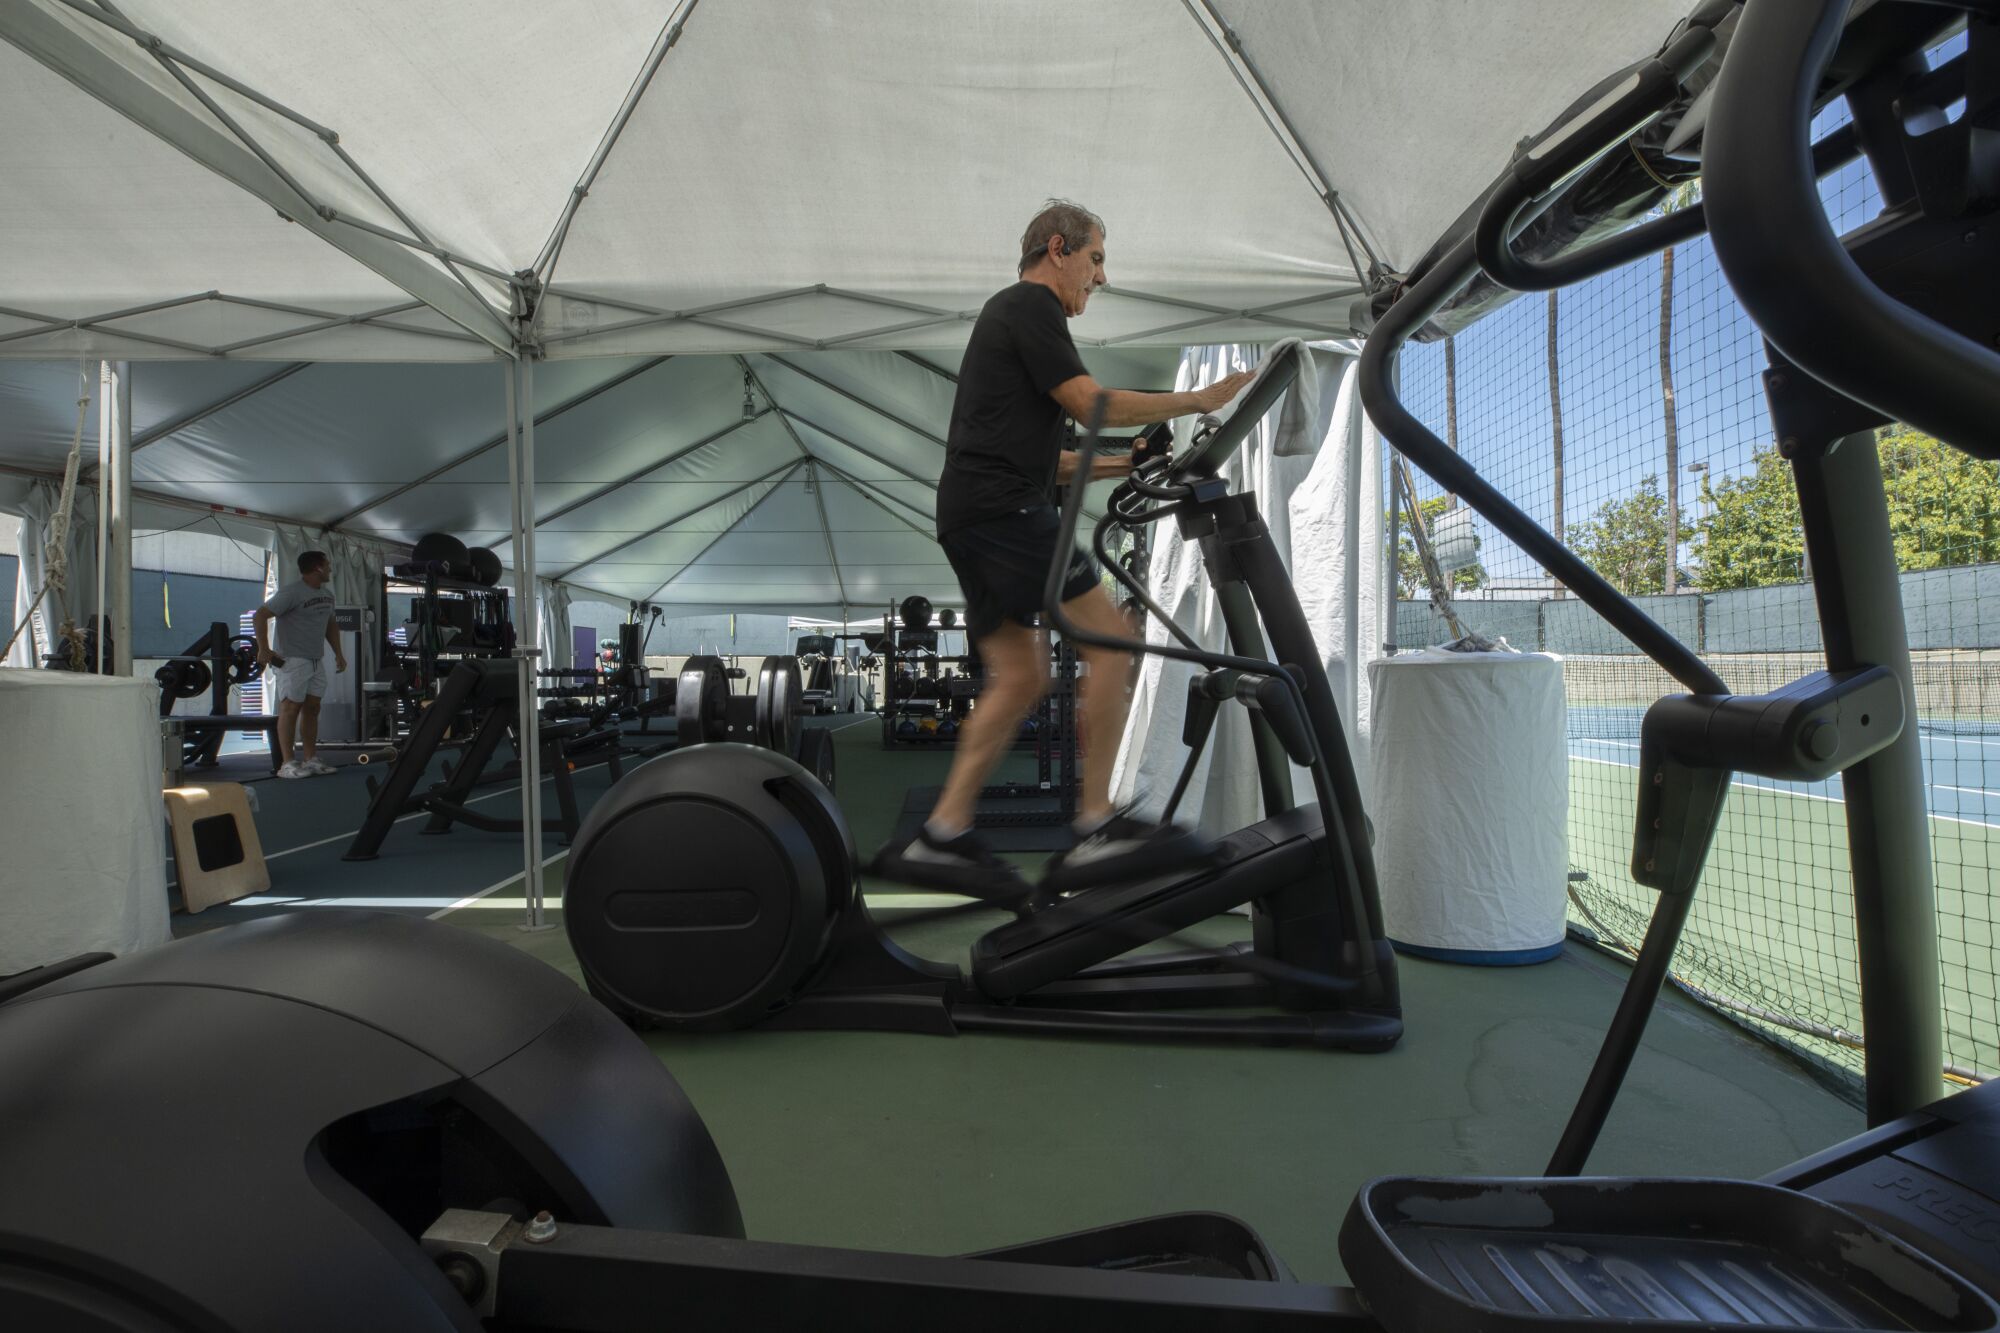 A man works out on an outdoor elliptical machine in an outdoor gym under a tent. 